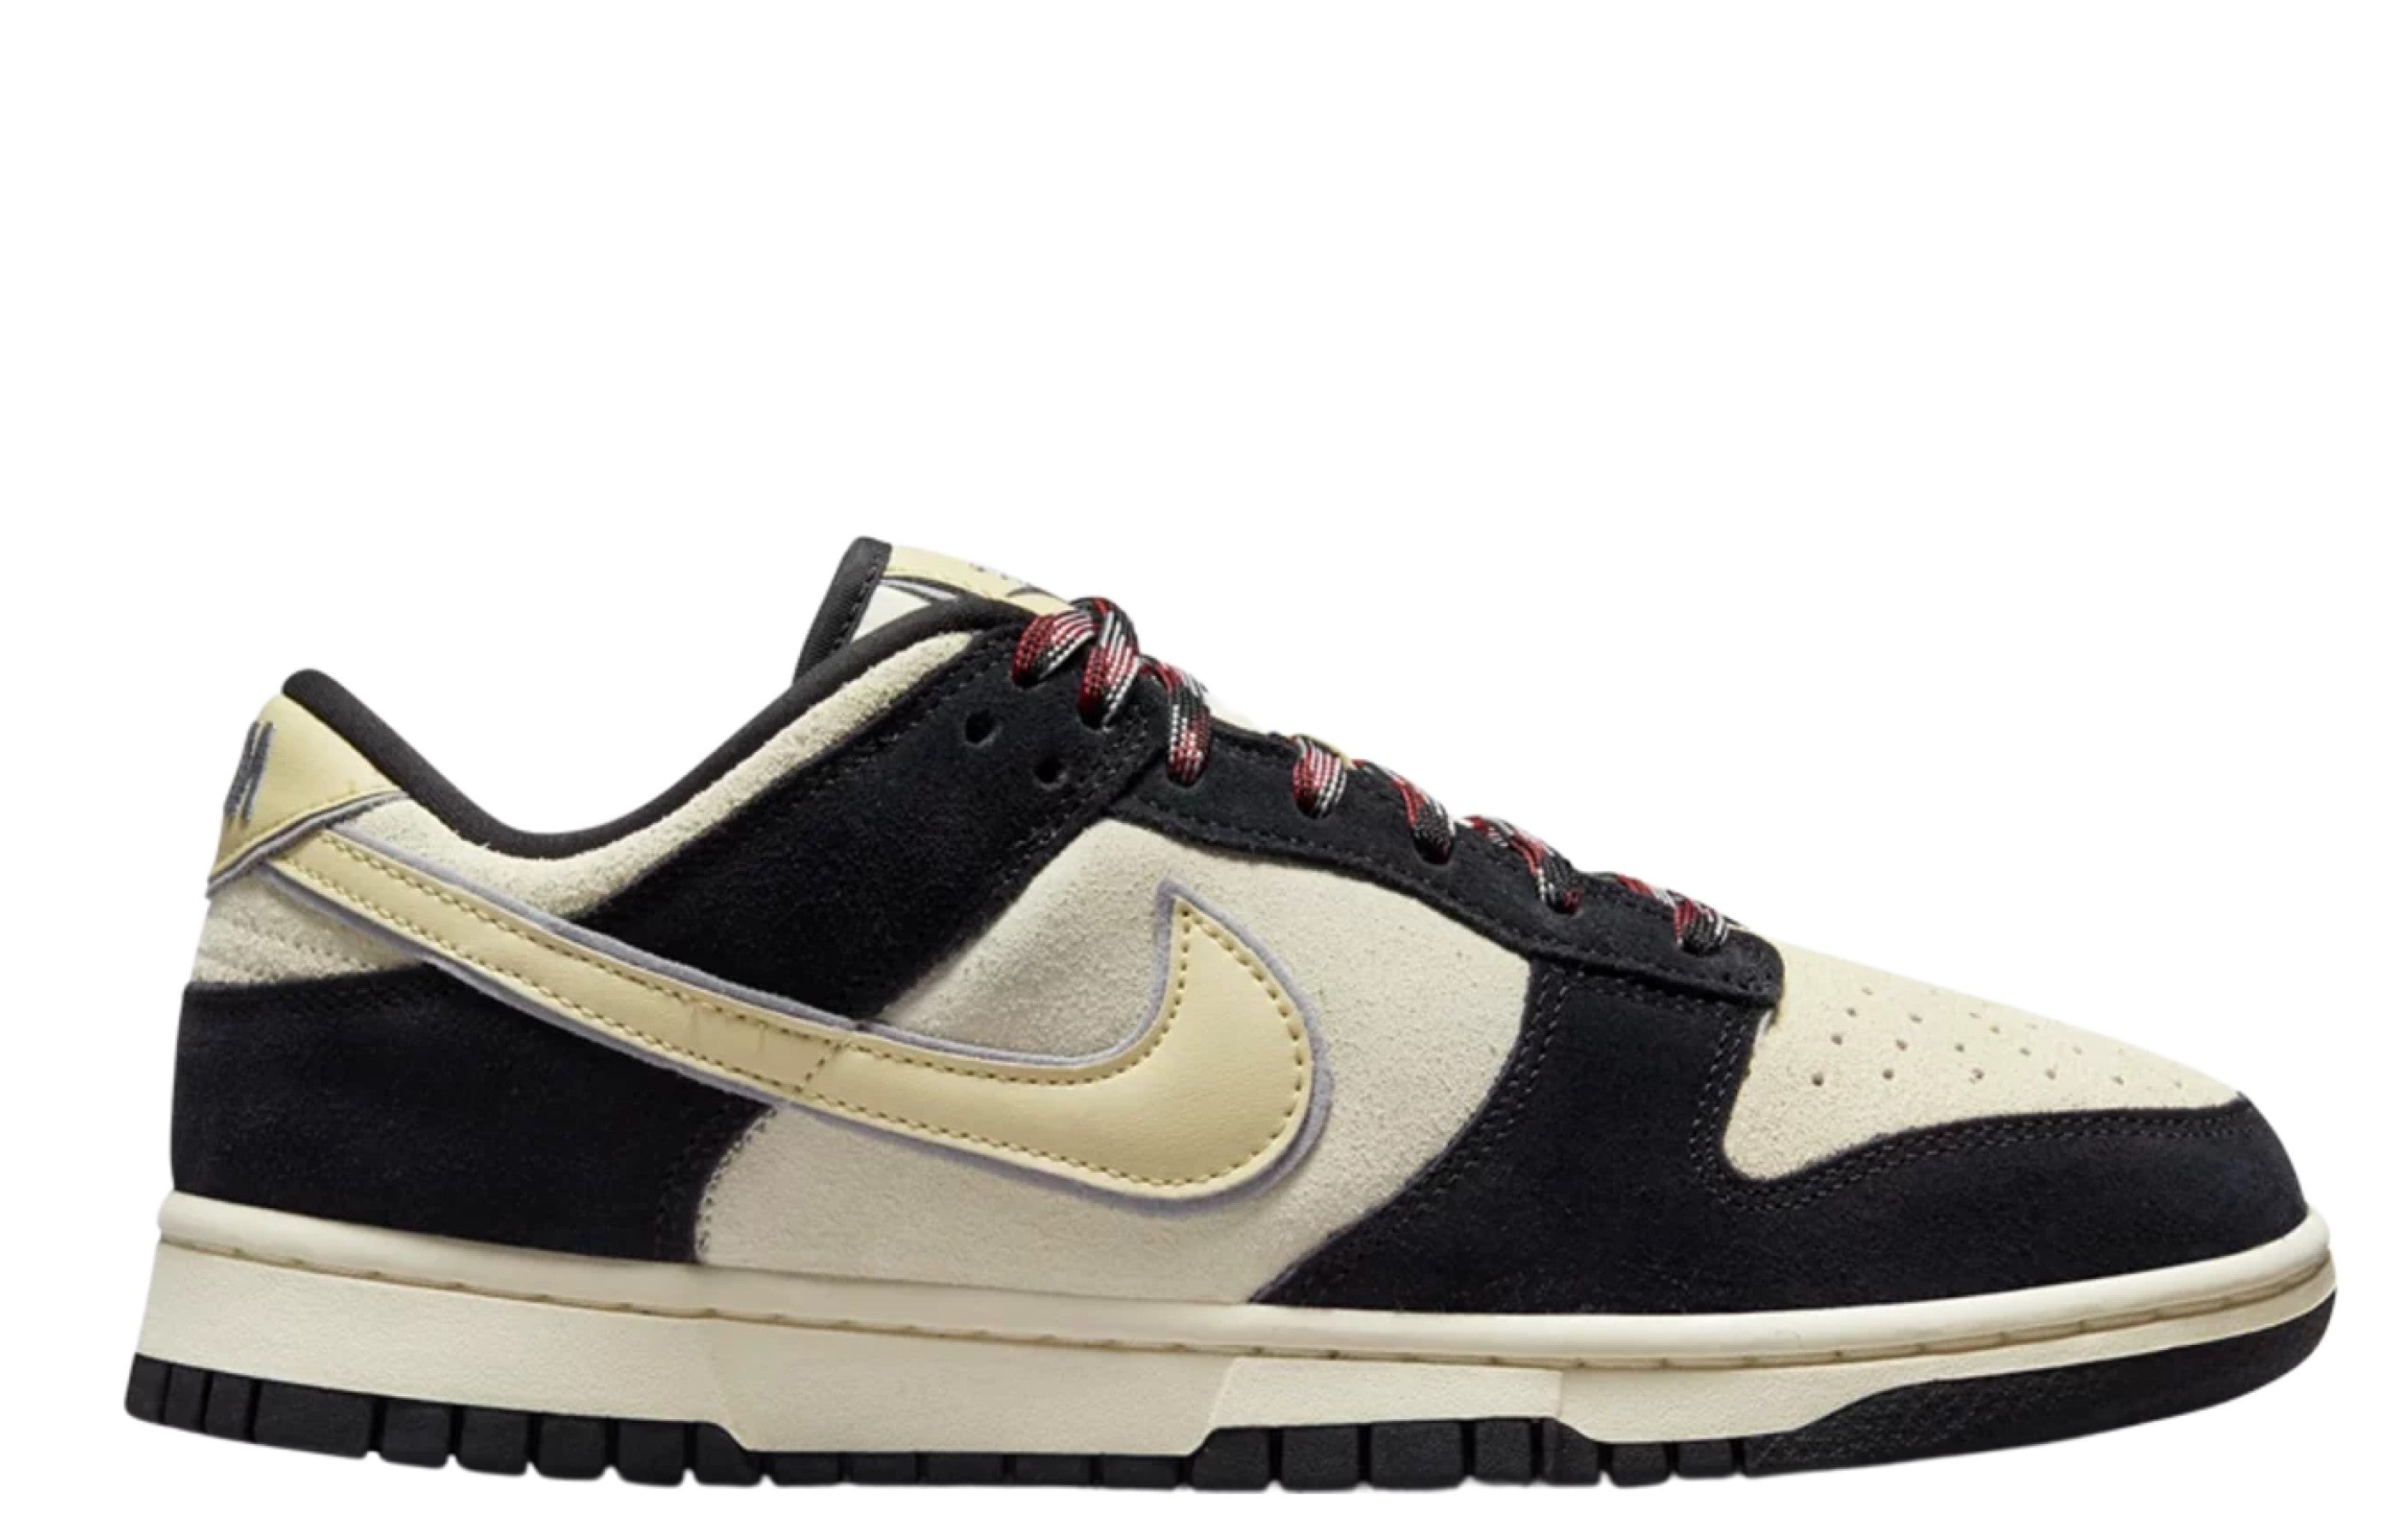 Nike Dunk Low LX Black Suede Team Gold (W)